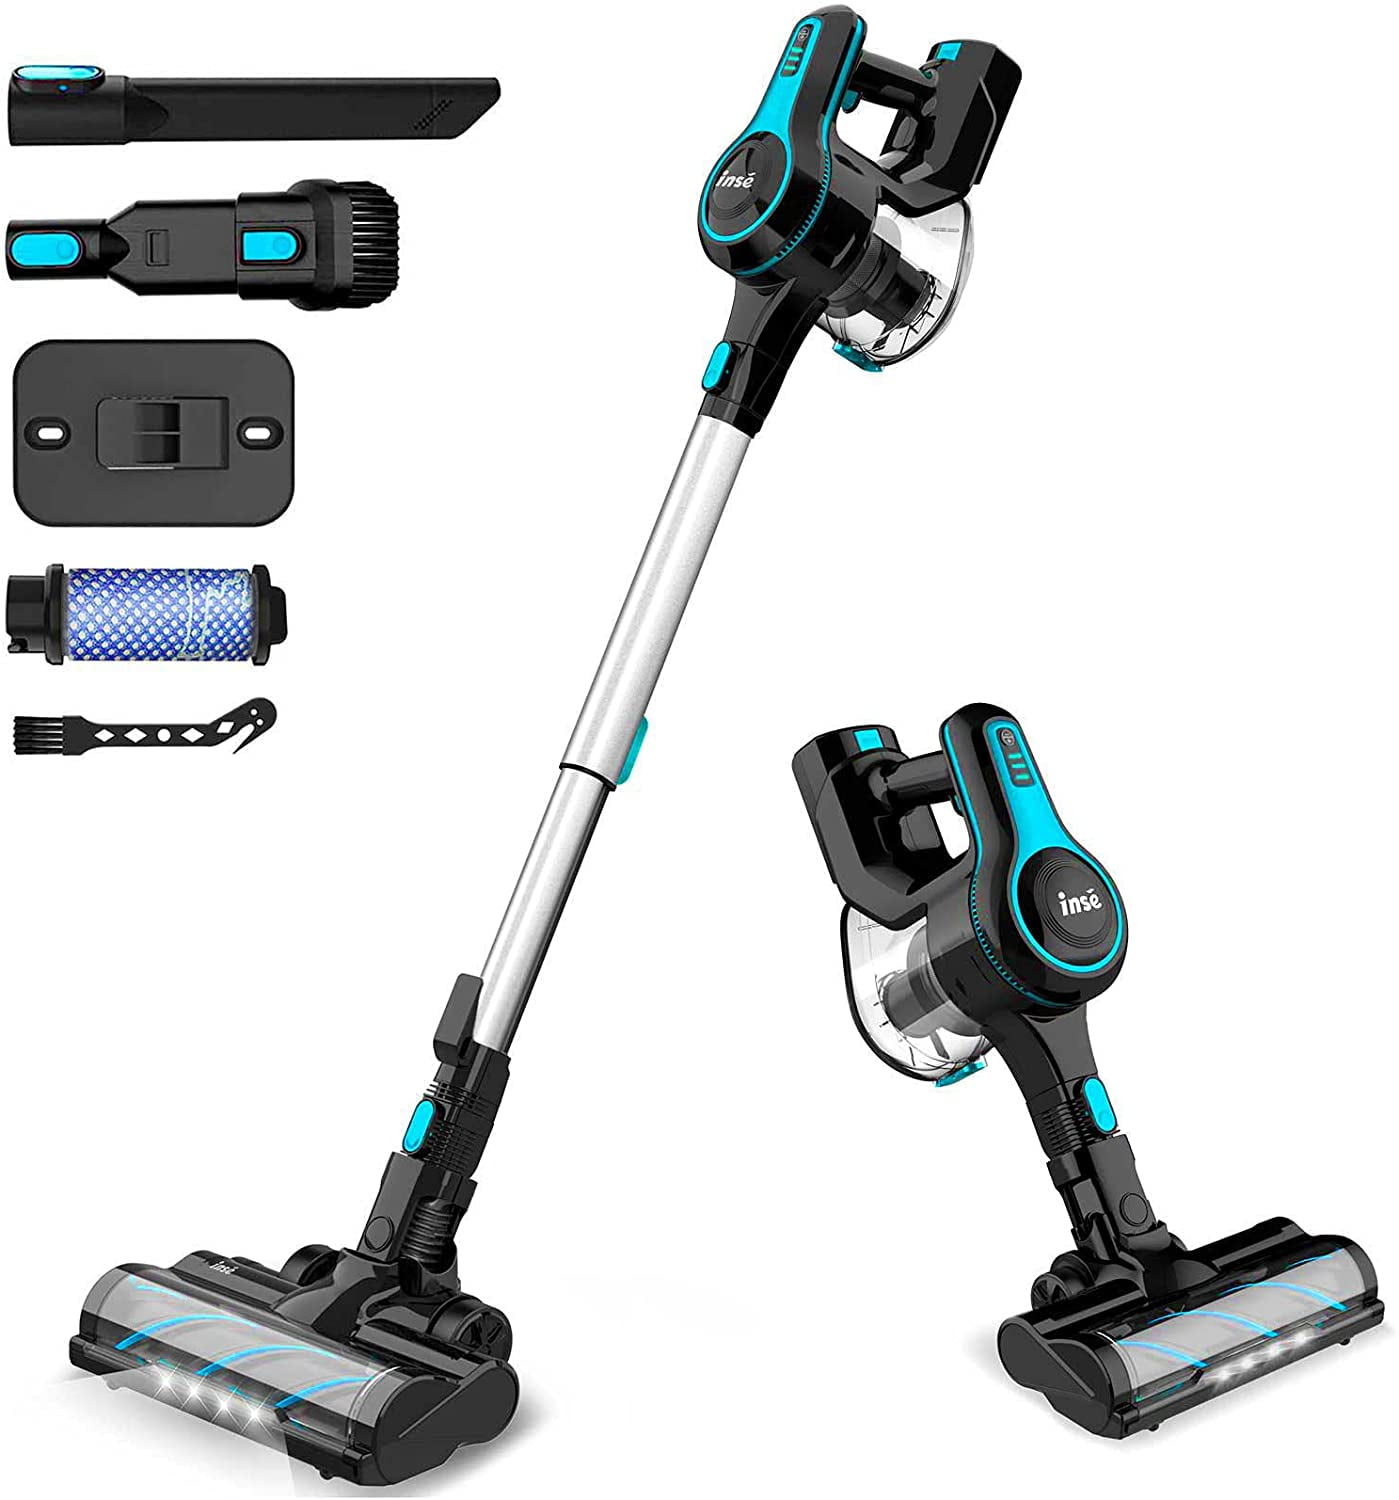 22kpa, Blue Powerful Suction HEPA Filteration Lightweight Upright Rechargeable for Carpet Floor Car LED Bagless Portable Stick Vacuum Cleaner Handheld Cordless Electric Broom 